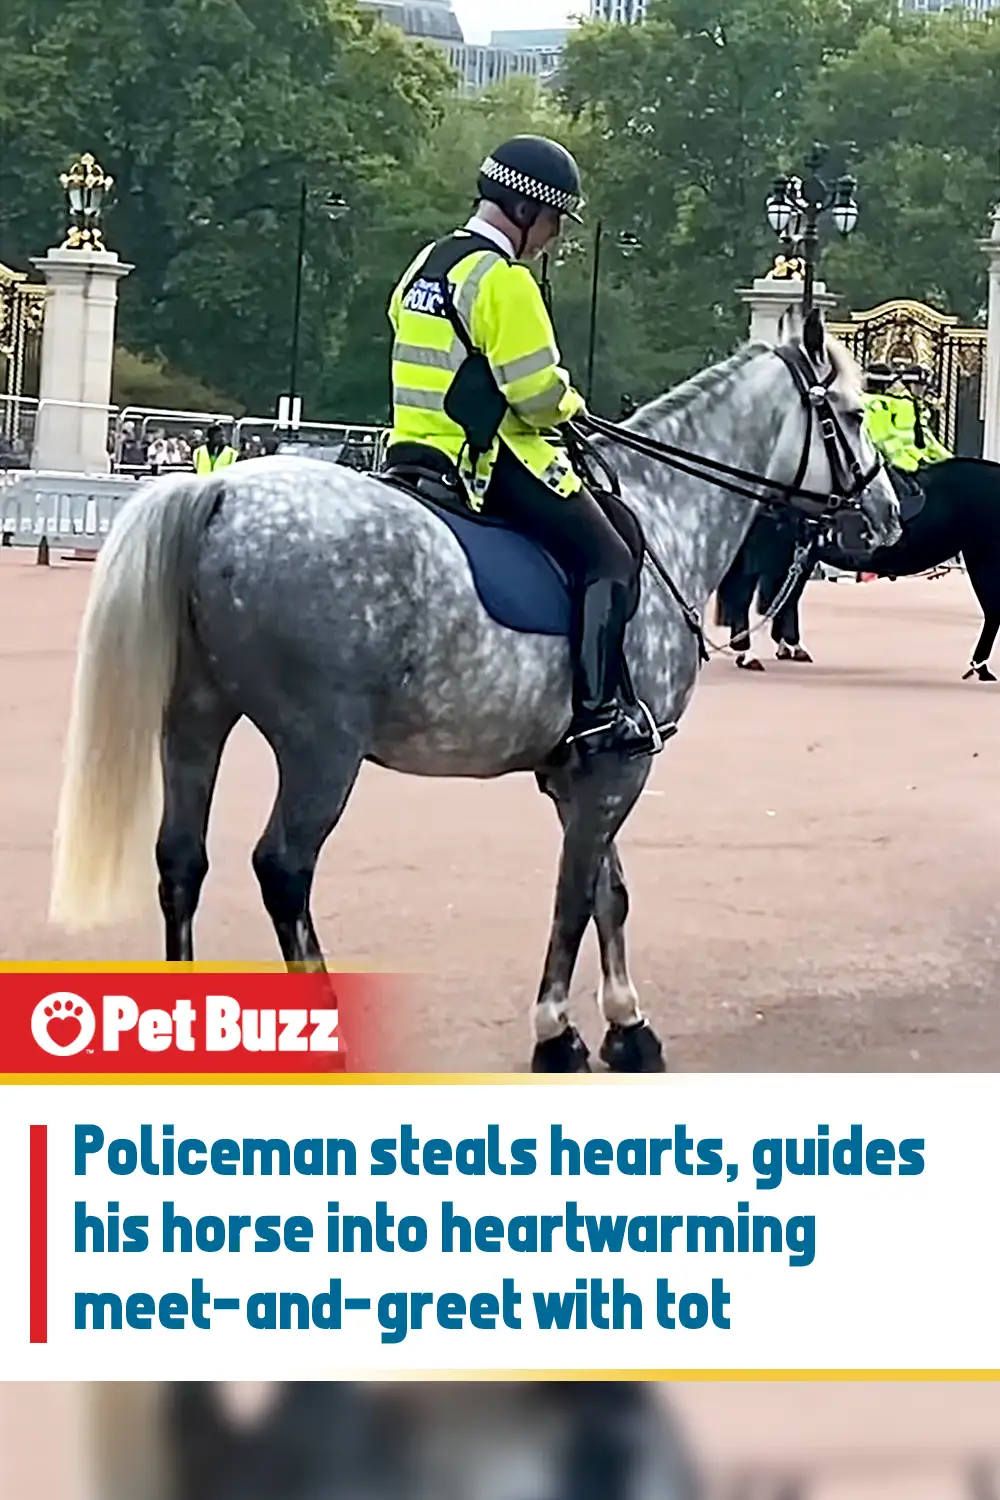 Policeman steals hearts, guides his horse into heartwarming meet-and-greet with tot